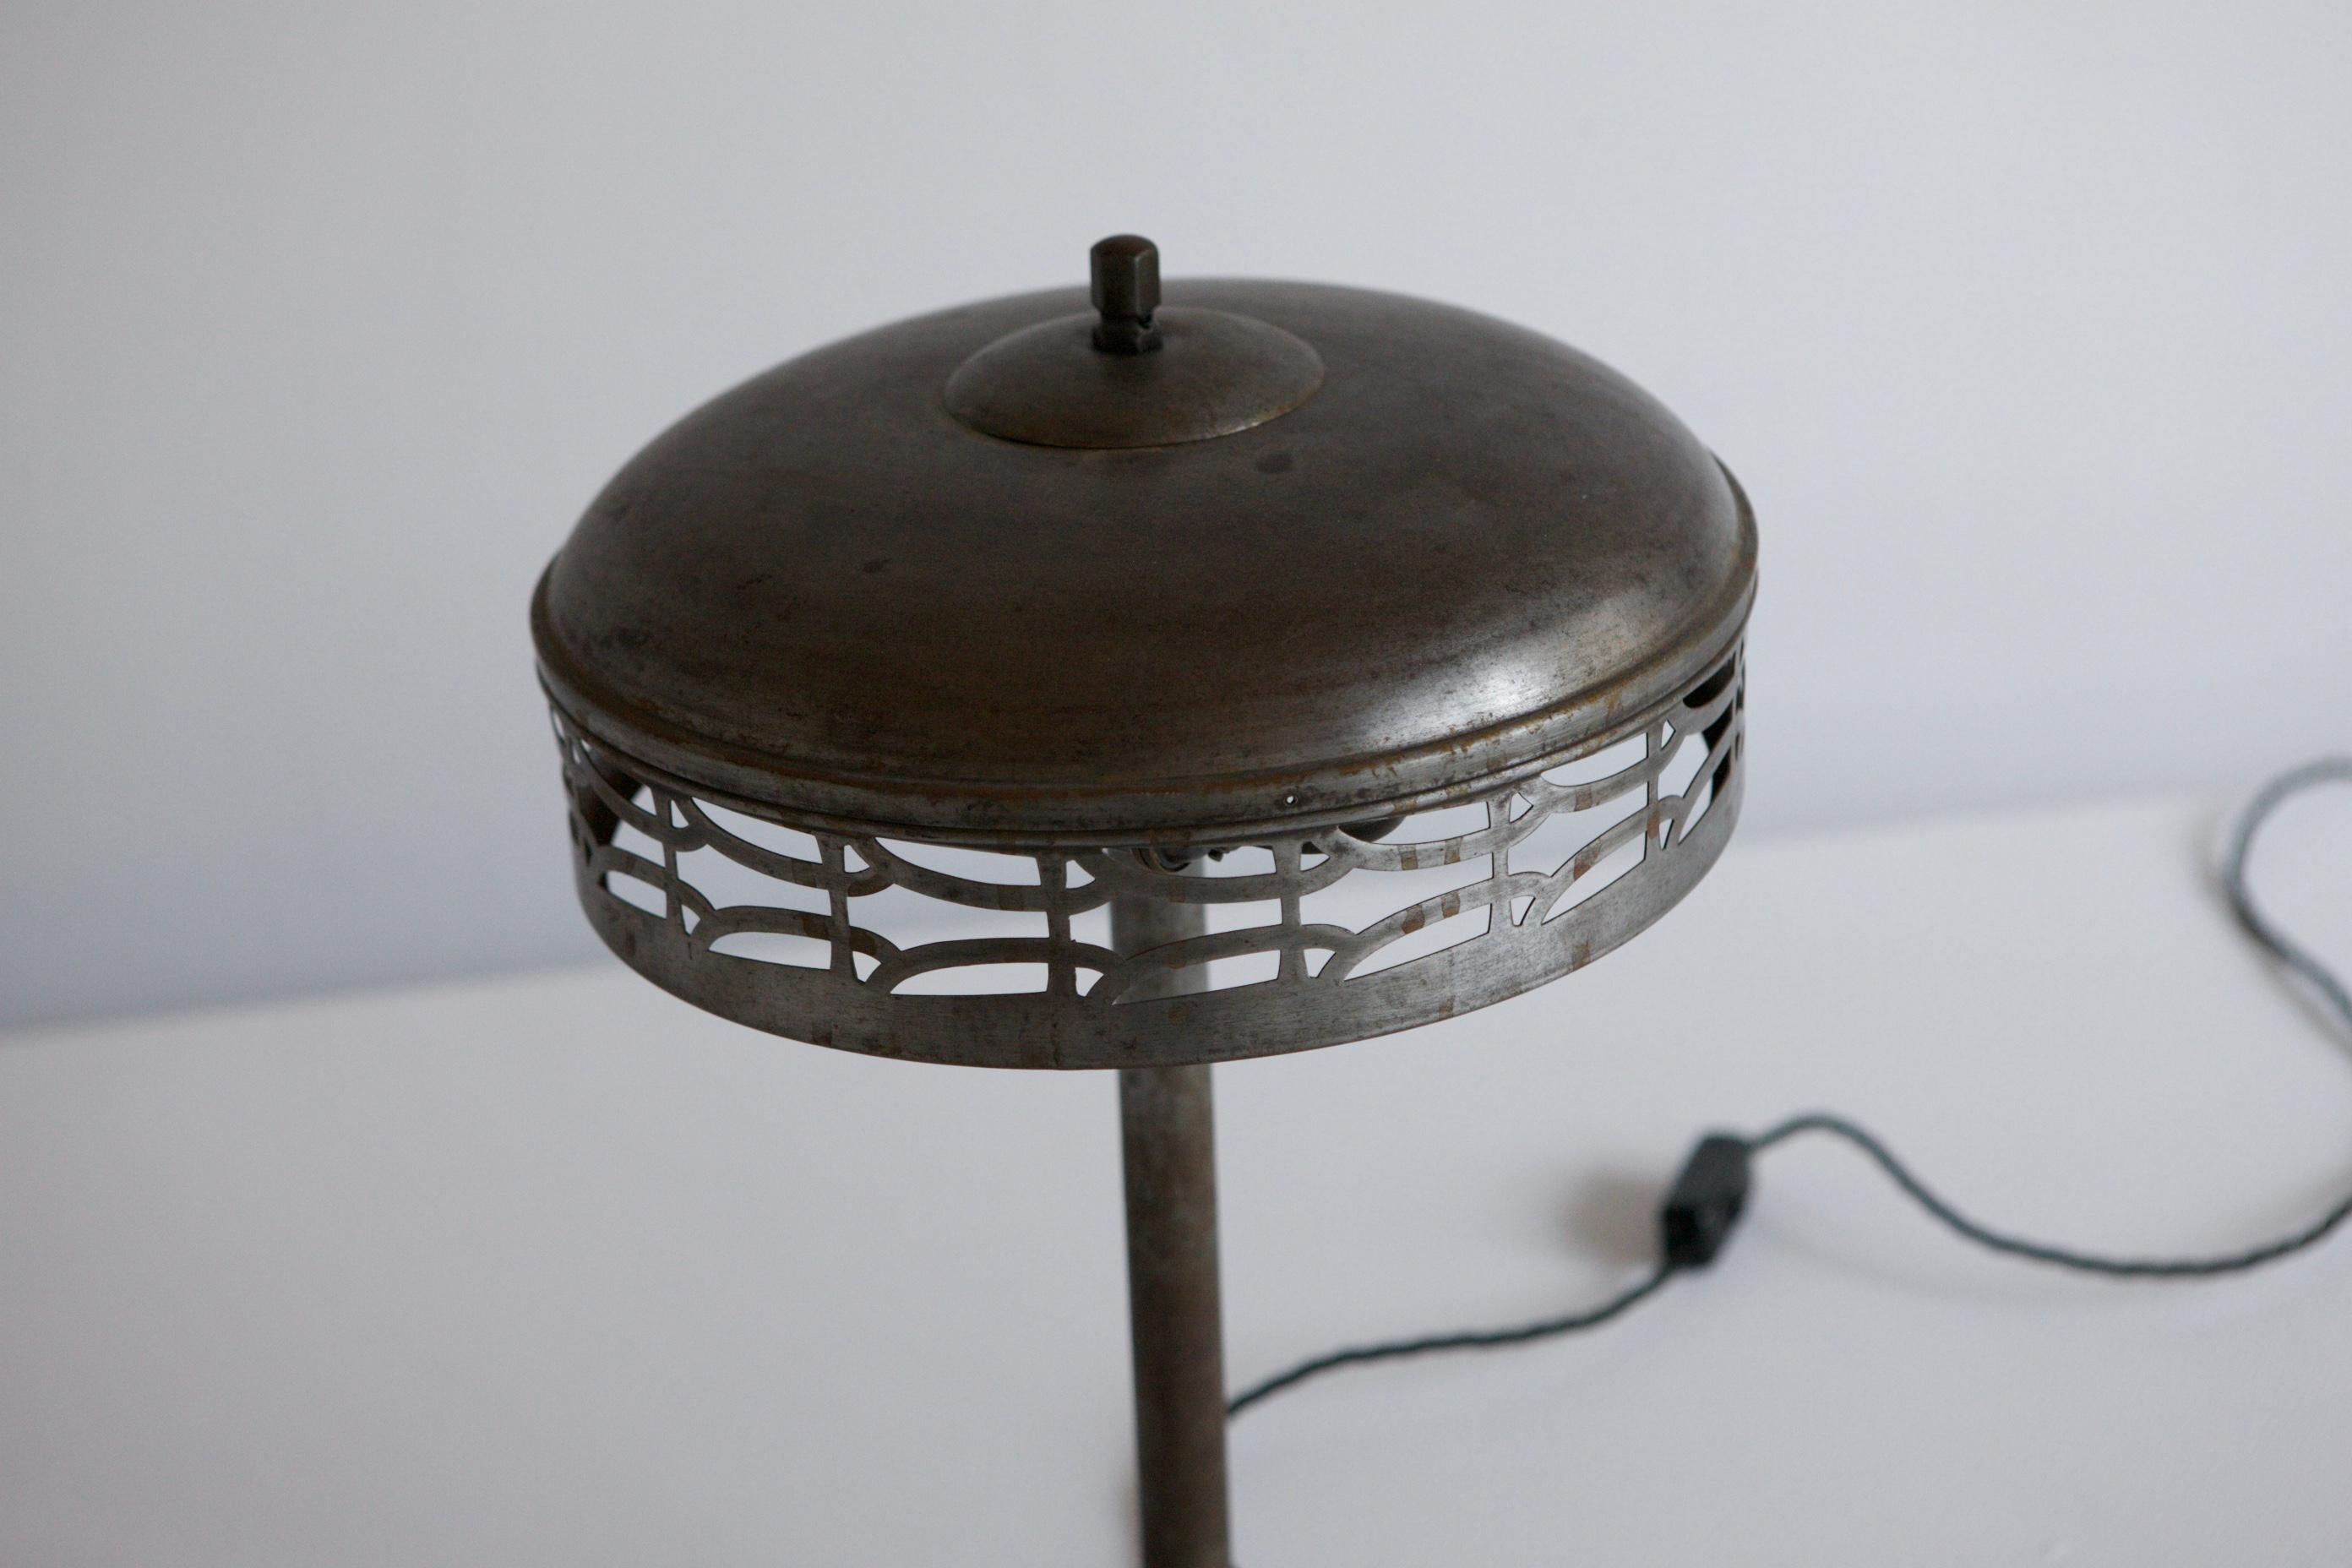 Austrian Early Modernist Table Lamp, Viennese Style